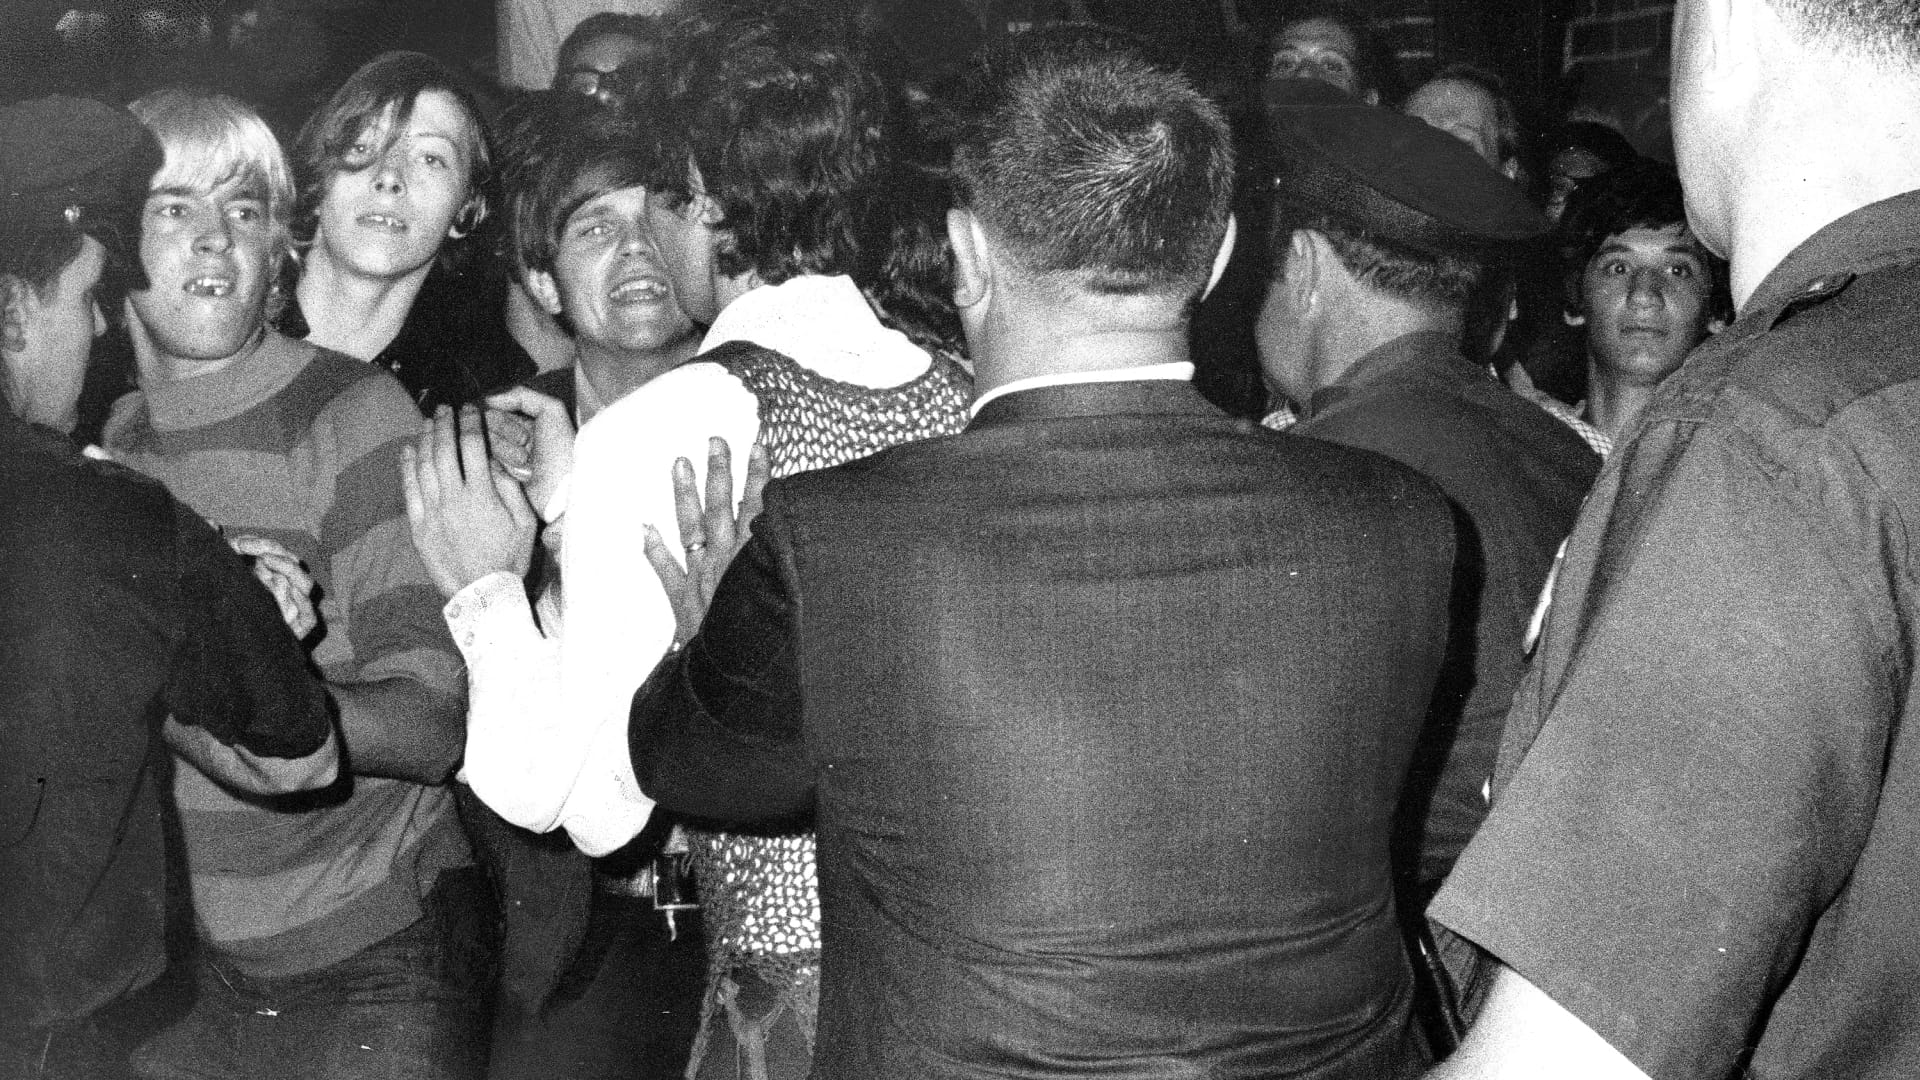 Crowd attempts to impede police outside the Stonewall Inn on Christopher Street in Greenwich Village, New York, June, 1969.